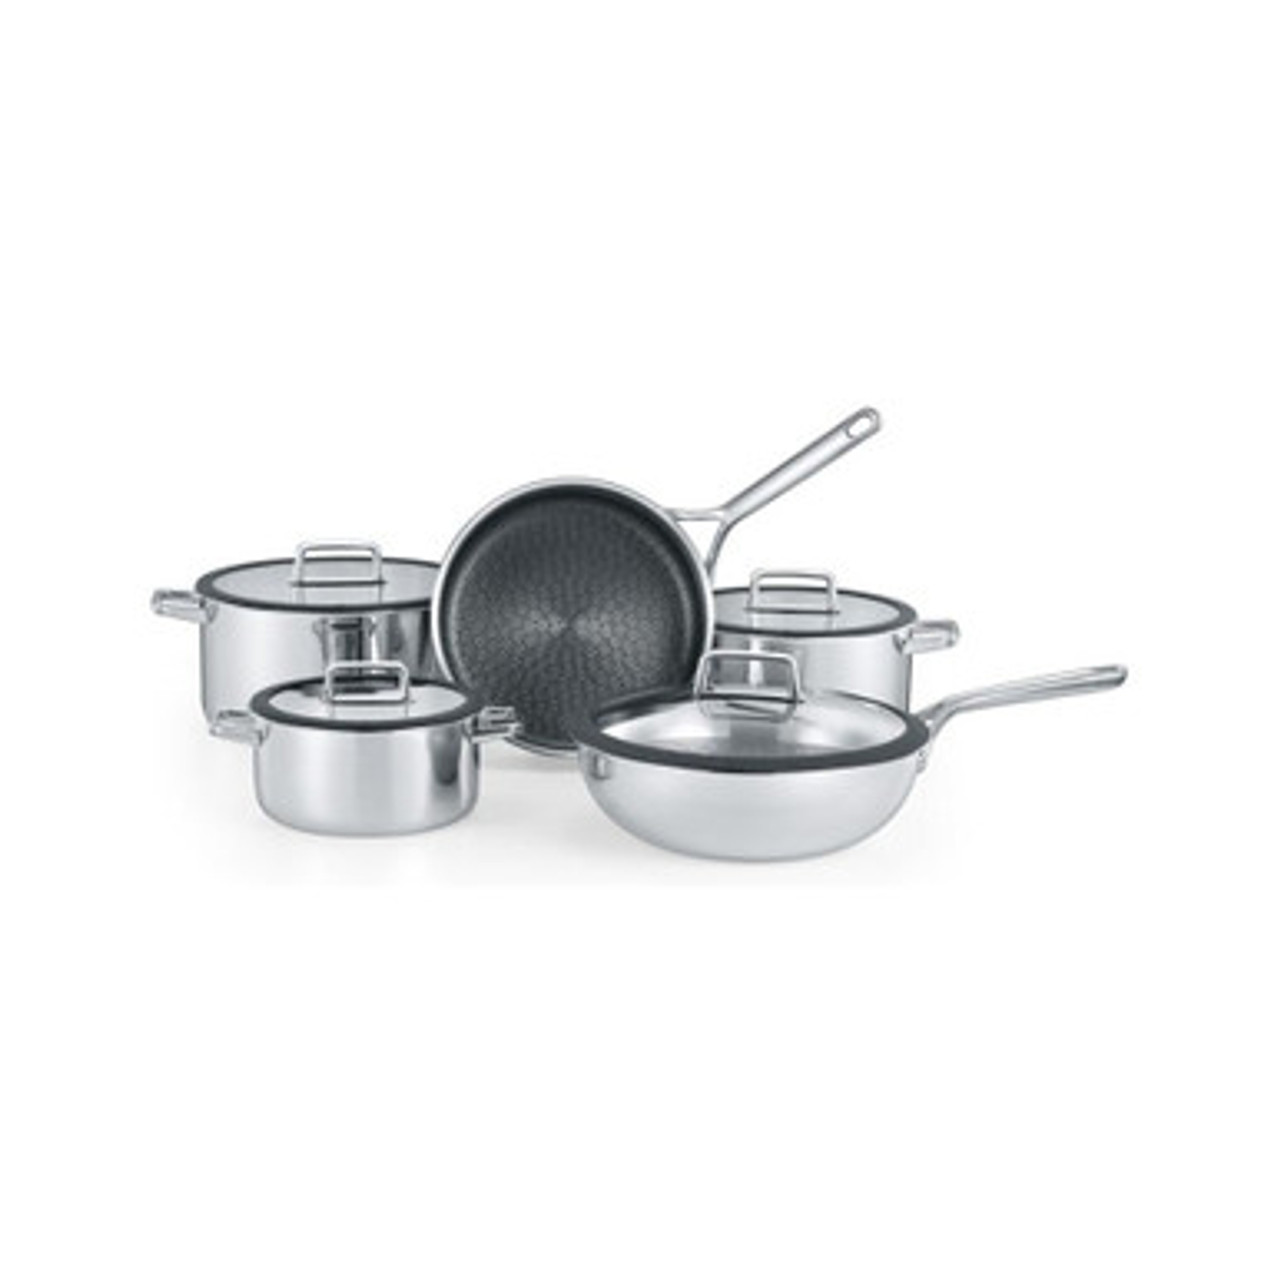 Arshia Stainless Steel Cookware set Nonstick 10pcs Duty Heavy